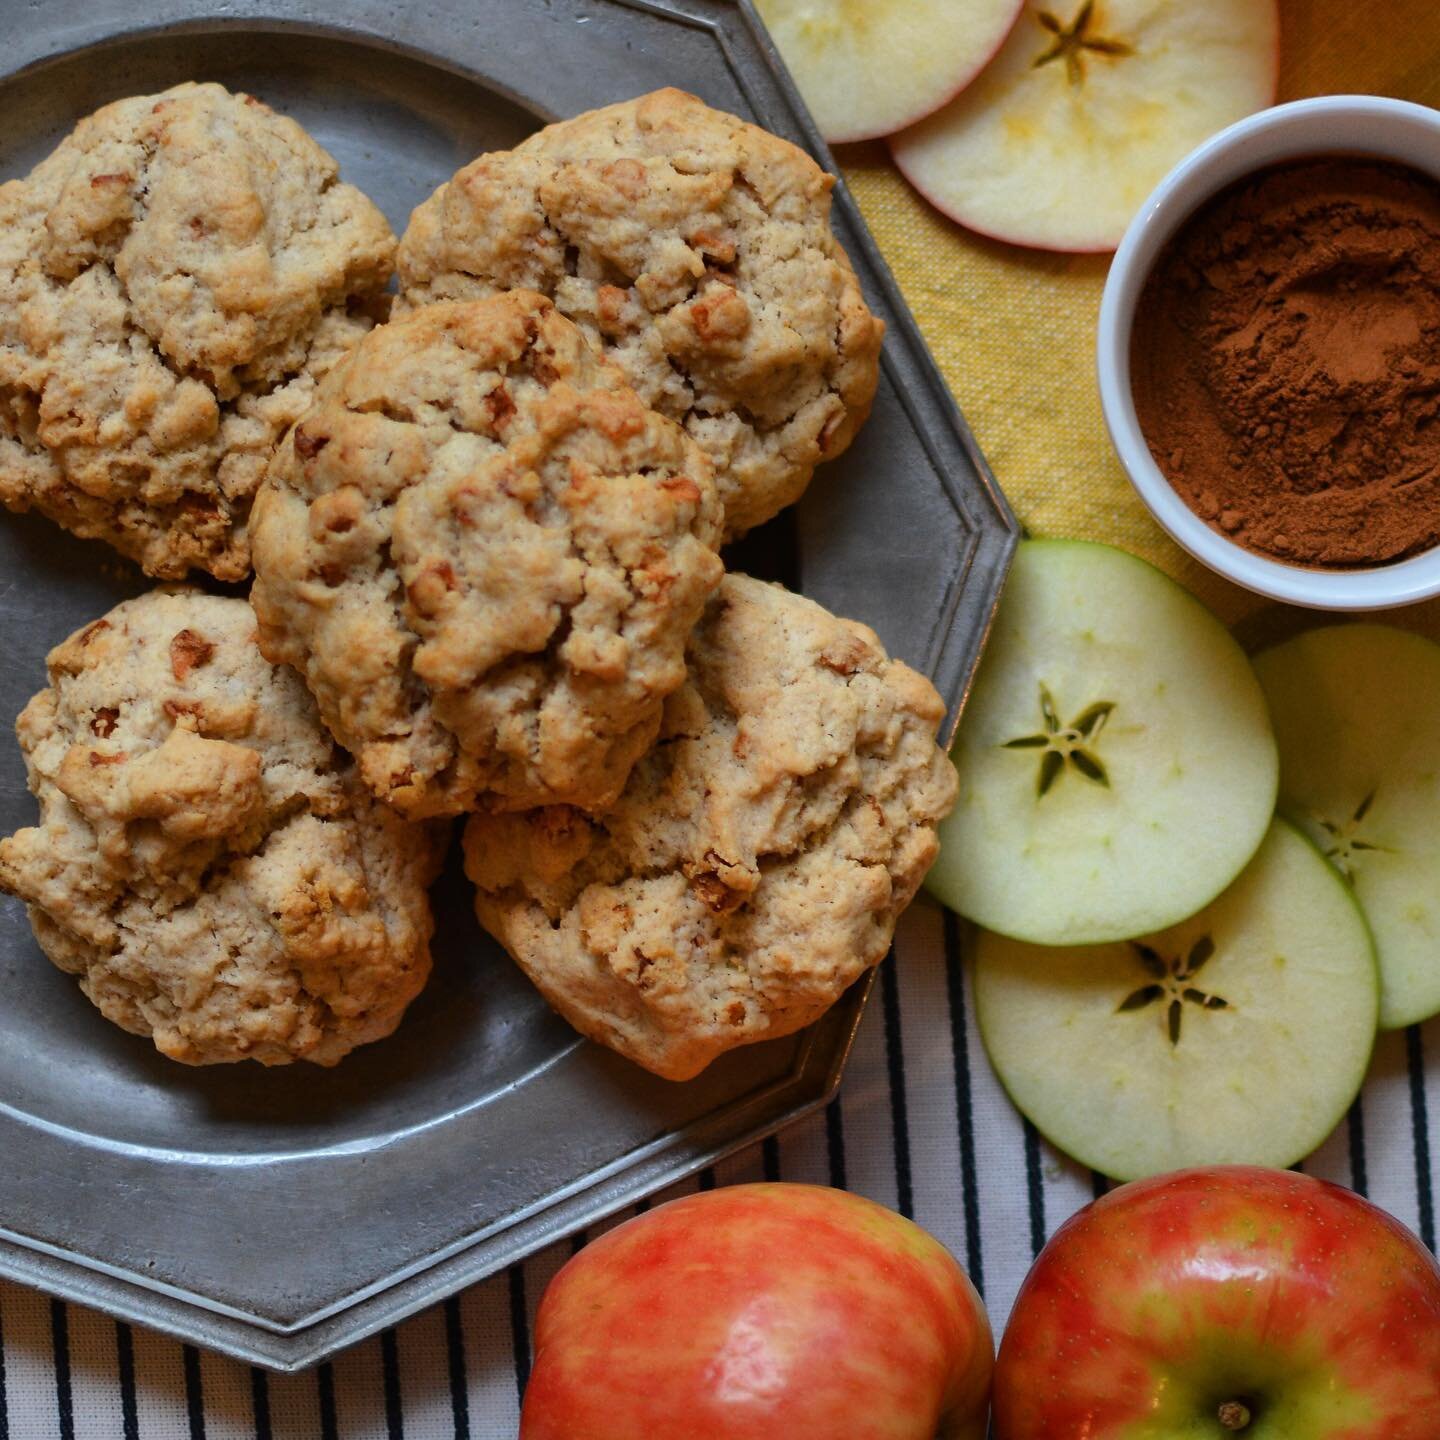 *NEW for Fall: 🍎 Apple Cinnamon available for preorder!*

Our newest scone features a depth of flavor from unsweetened applesauce, diced dried apples, real vanilla beans and just the right amount of cinnamon. Preorder today for September 7 pick up o